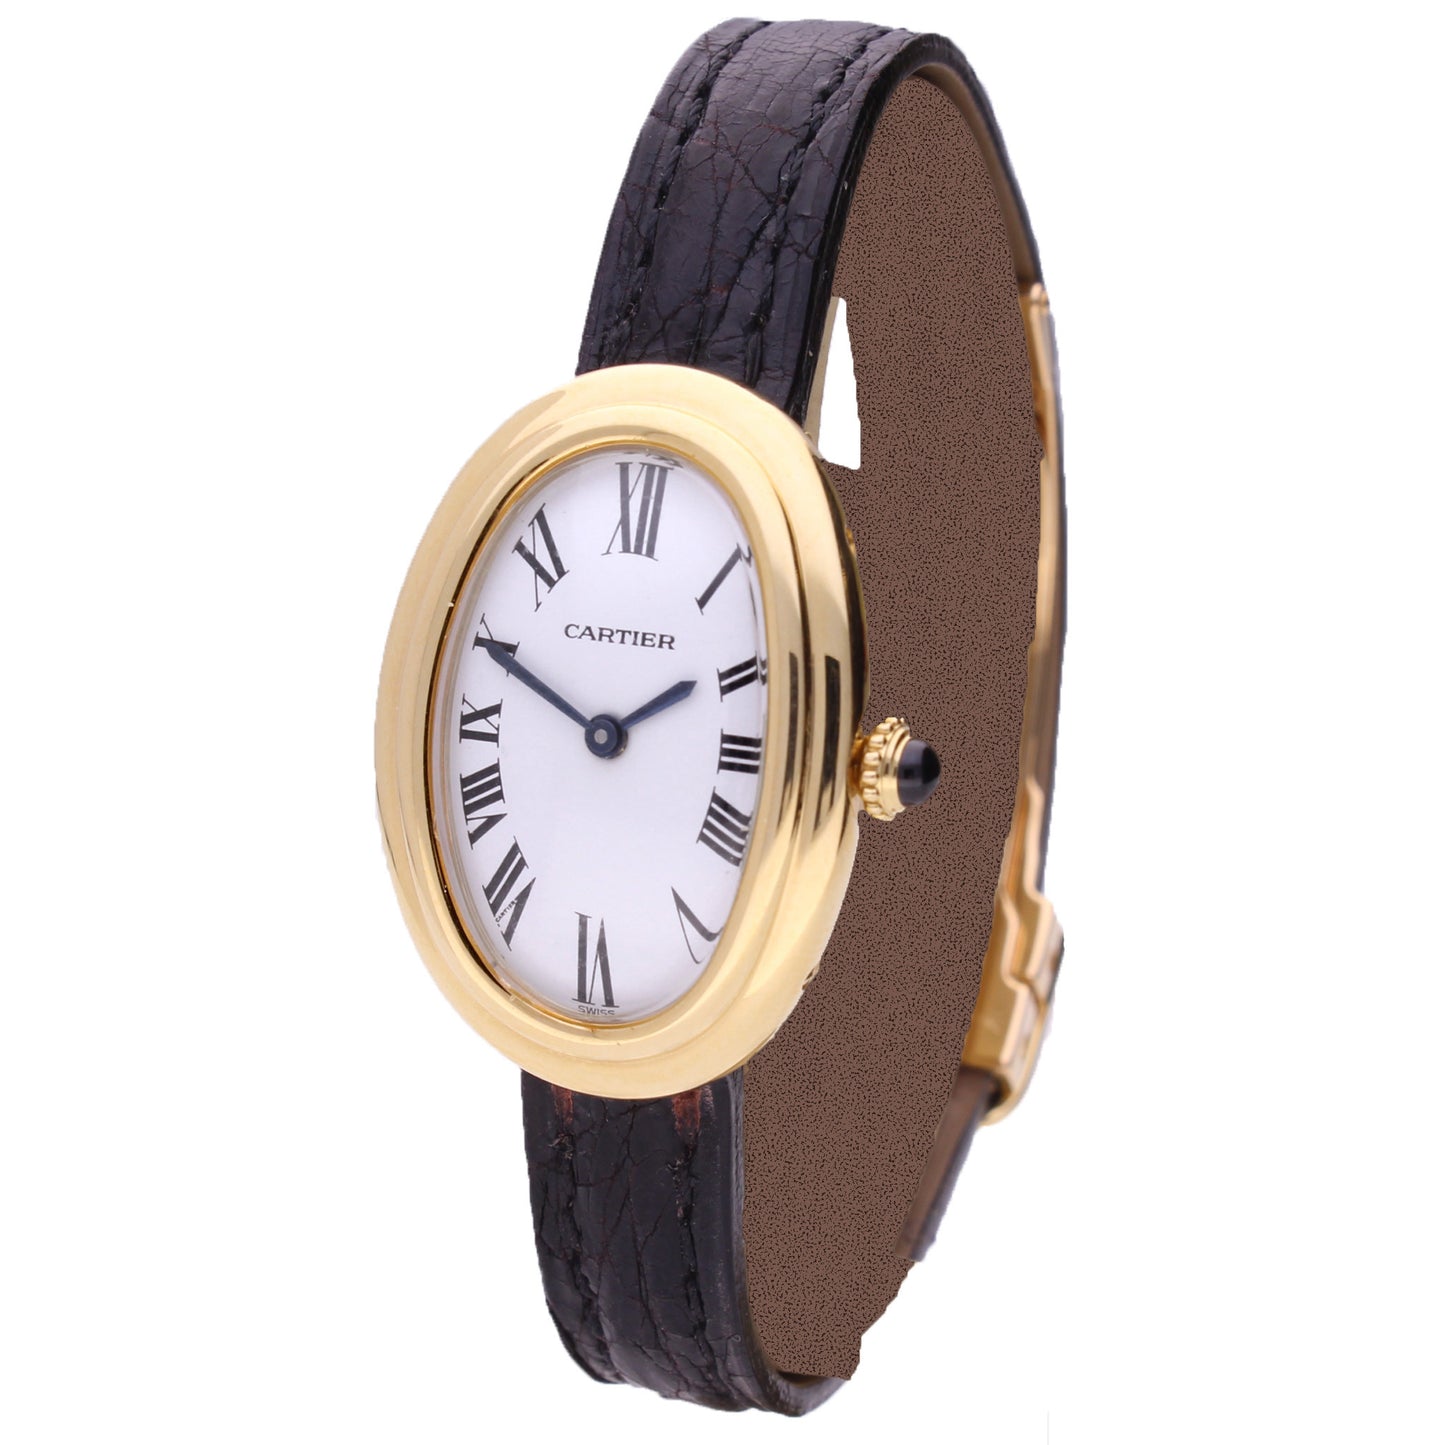 18ct yellow gold Baignoire wristwatch. Made 1970's